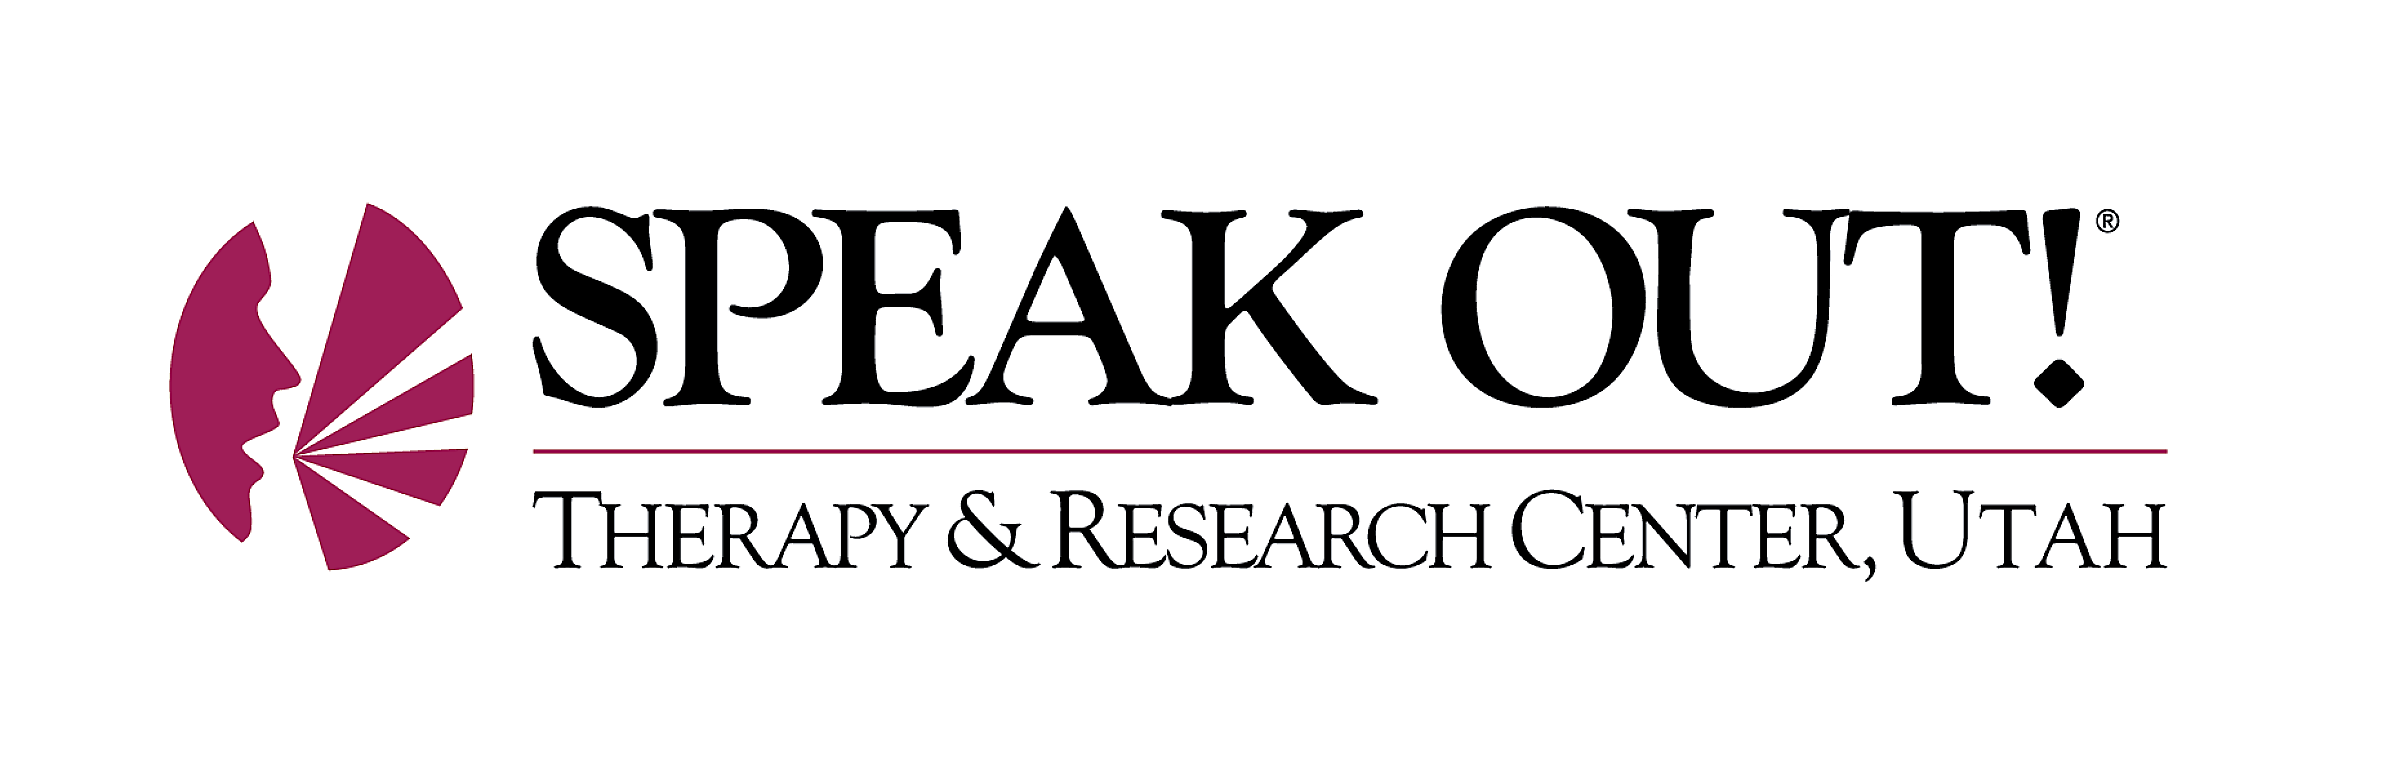 Speak Out! Therapy & Research Center, Utah logo